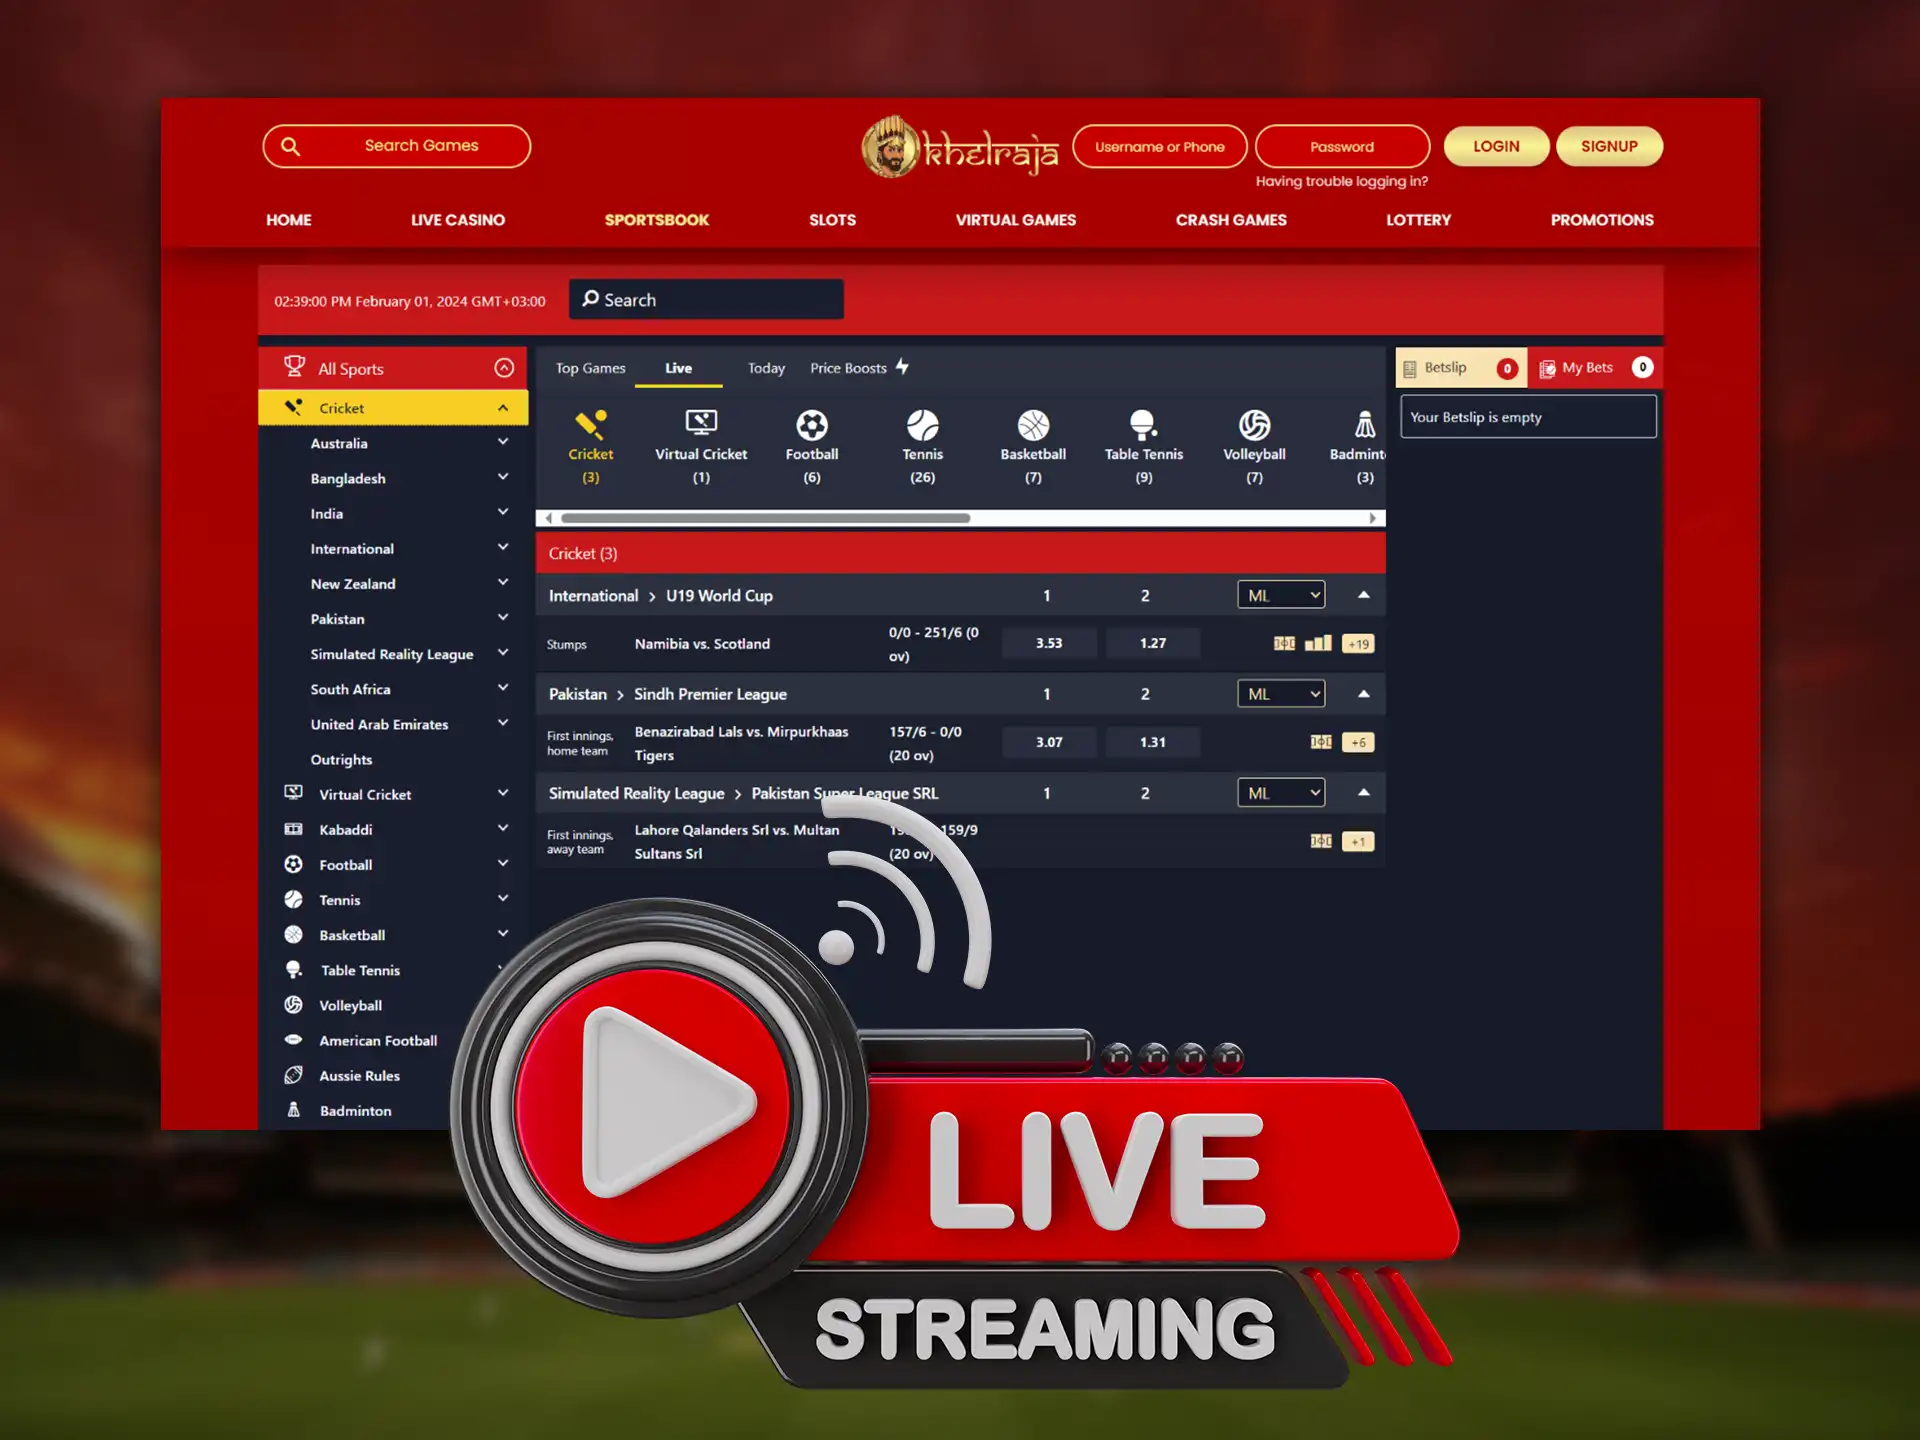 New bookmakers offer live streaming of sporting events.